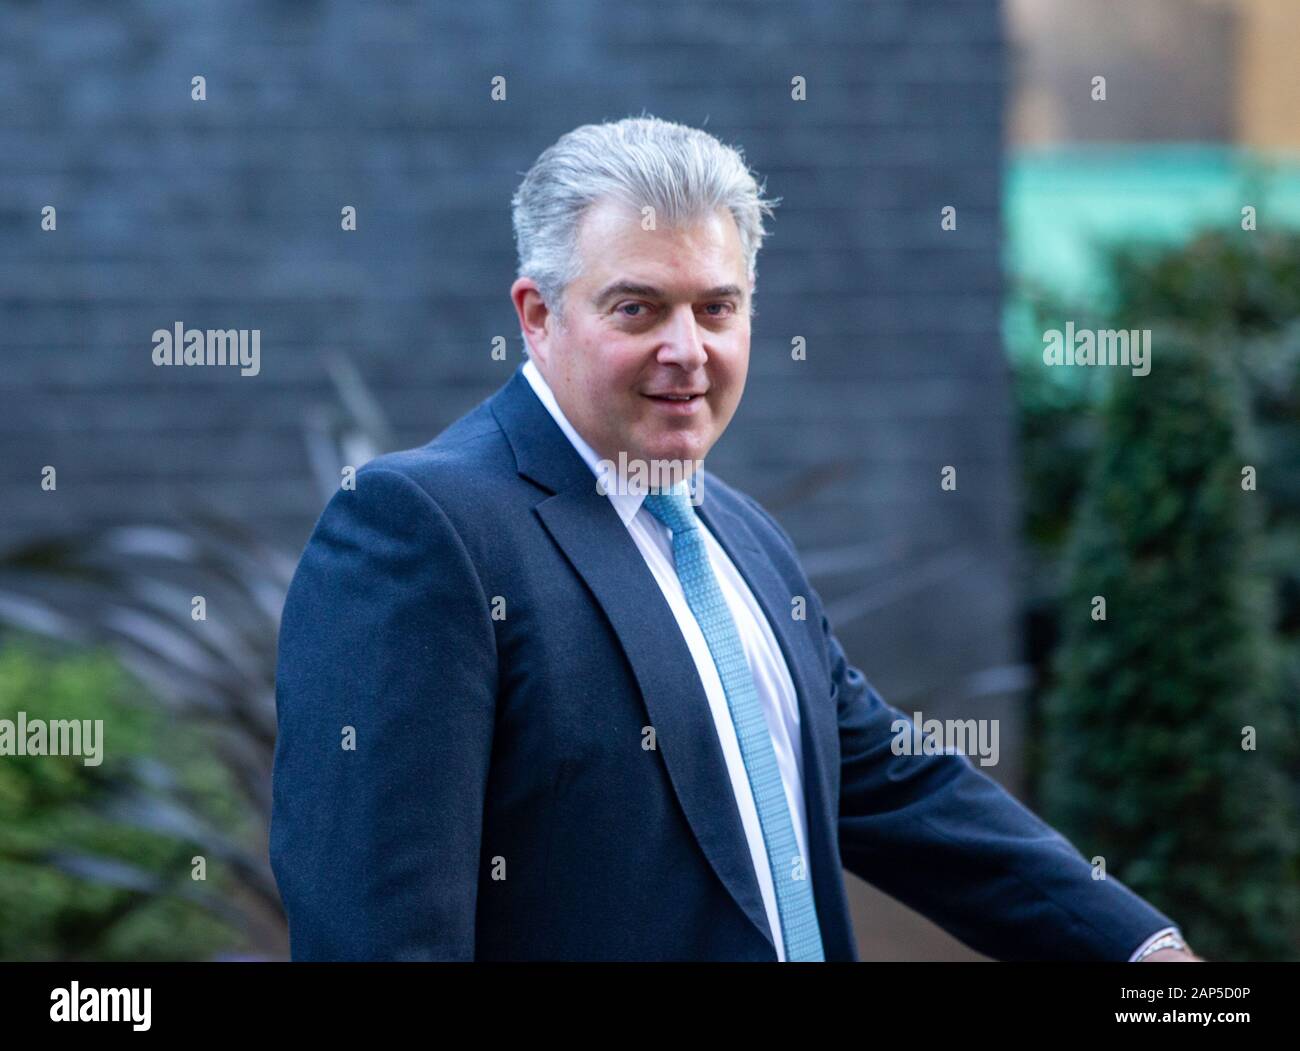 London, UK. 21st Jan, 2020. Brandon Lewis, Minister of State for Security and Deputy for EU Exit and No Deal Preparation, at Downing street for a meeting Credit: Tommy London/Alamy Live News Stock Photo